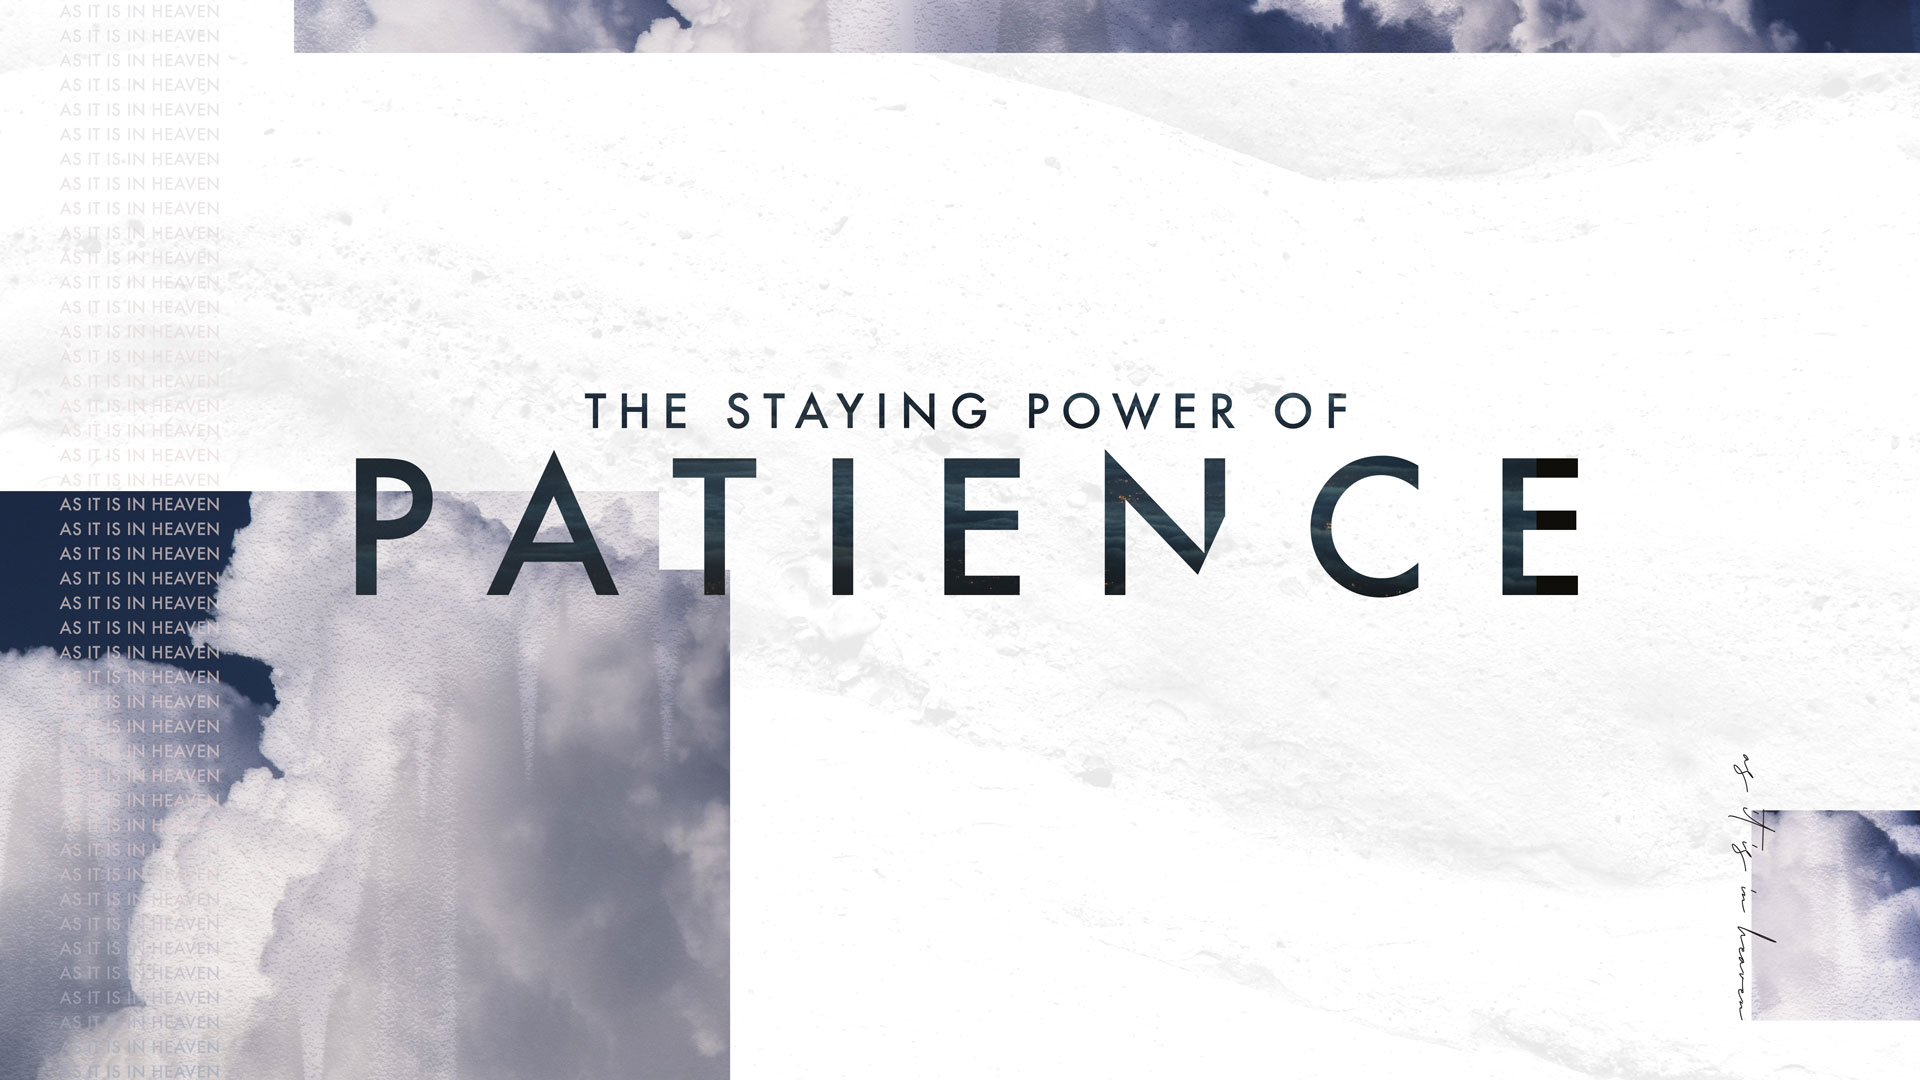 The Staying Power of Patience